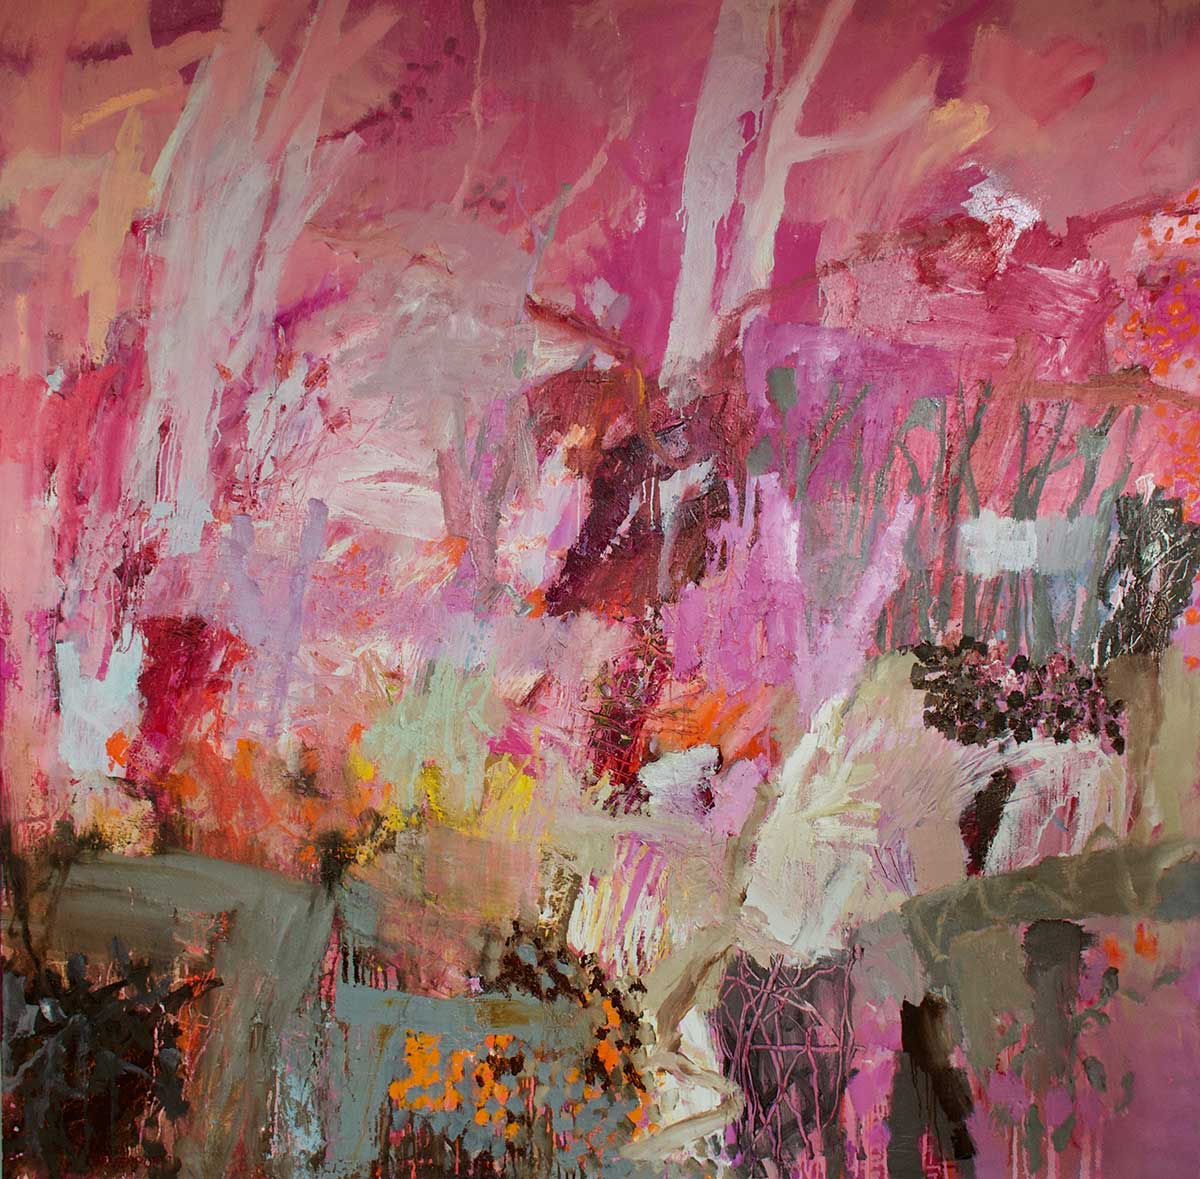 Abstract painting featuring large quick brush marks in a predominantly pink and red palette. - click to view larger image